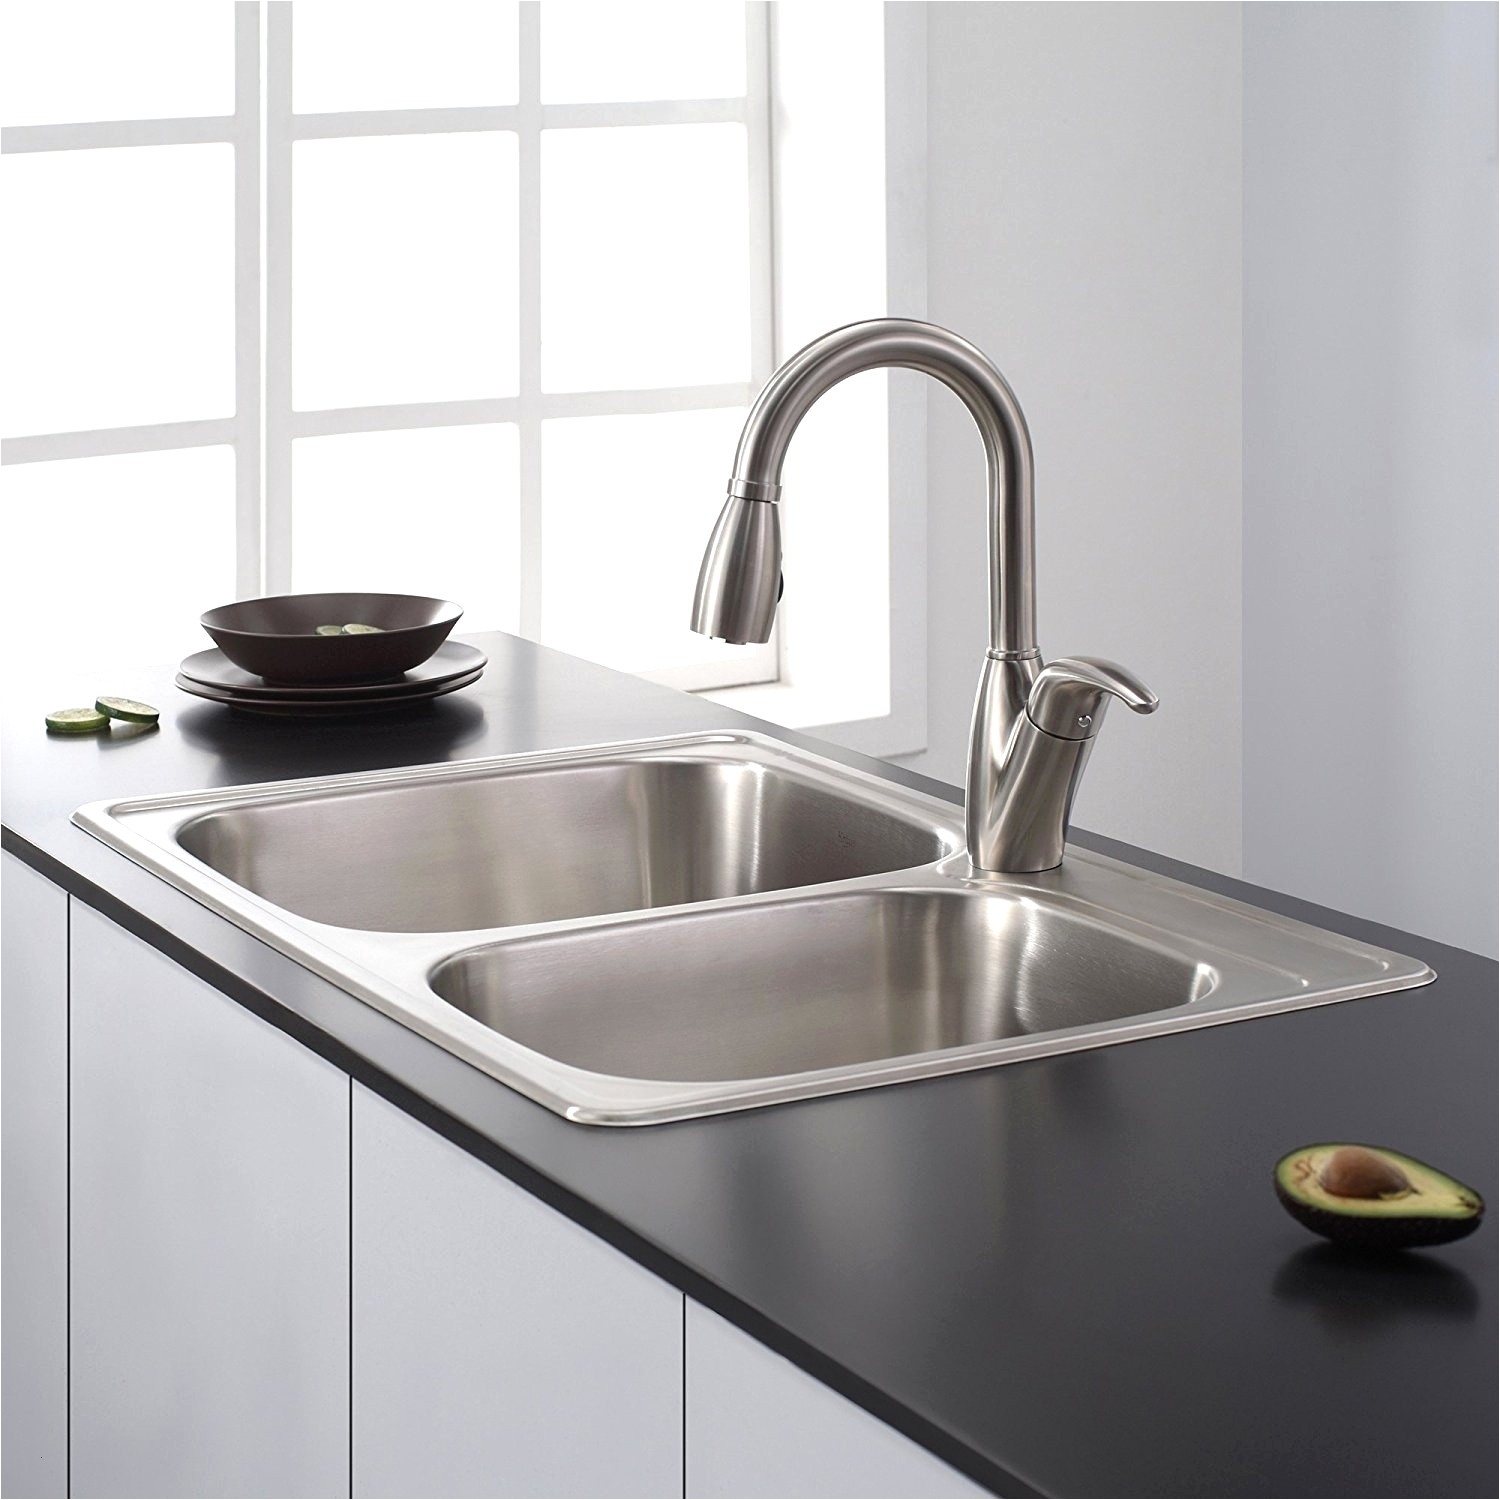 elegant installing a new faucet h sink new bathroom i 0d inspiring of replace kitchen sink